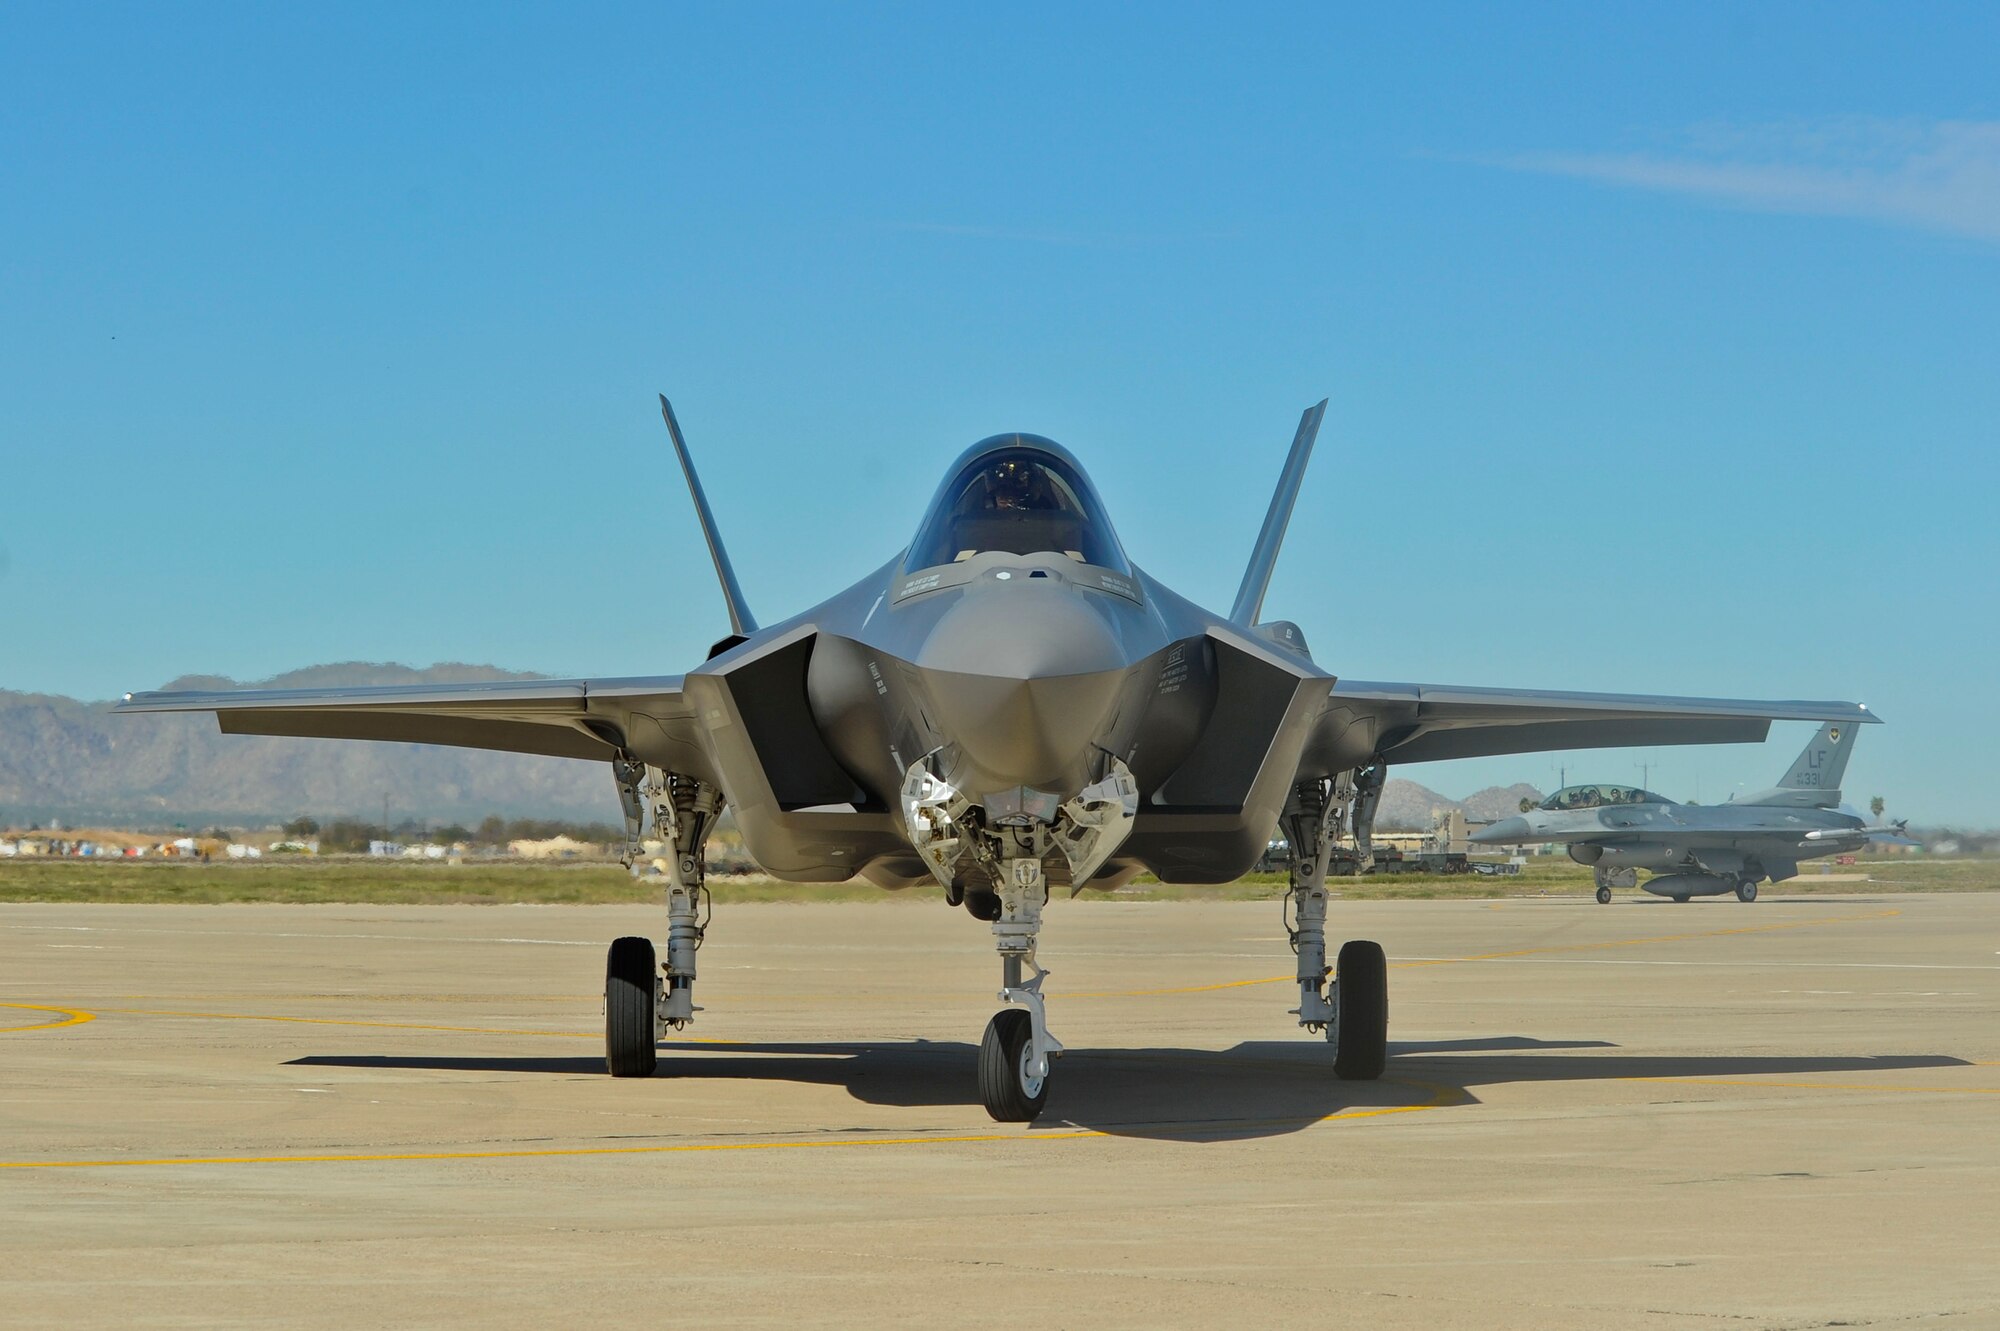 The F-35 Lightning II makes its first appearance at Luke Air Force Base on March 10. The aircraft was flown in directly from the Lockheed Martin factor at Fort Worth, Tex., and is the first of 144 F-35s that will eventually be assigned to the base. “Having F-35s at Luke ensures the long-term viability of our mission and safeguards the long-term presence of the base as a community partner and an economic engine in the West Valley,” Col. John Hanna, 56th Operations Group commander, said at a press conference after the jet landed. (U.S. Air Force photo/Staff Sgt. Darlene Seltmann) 